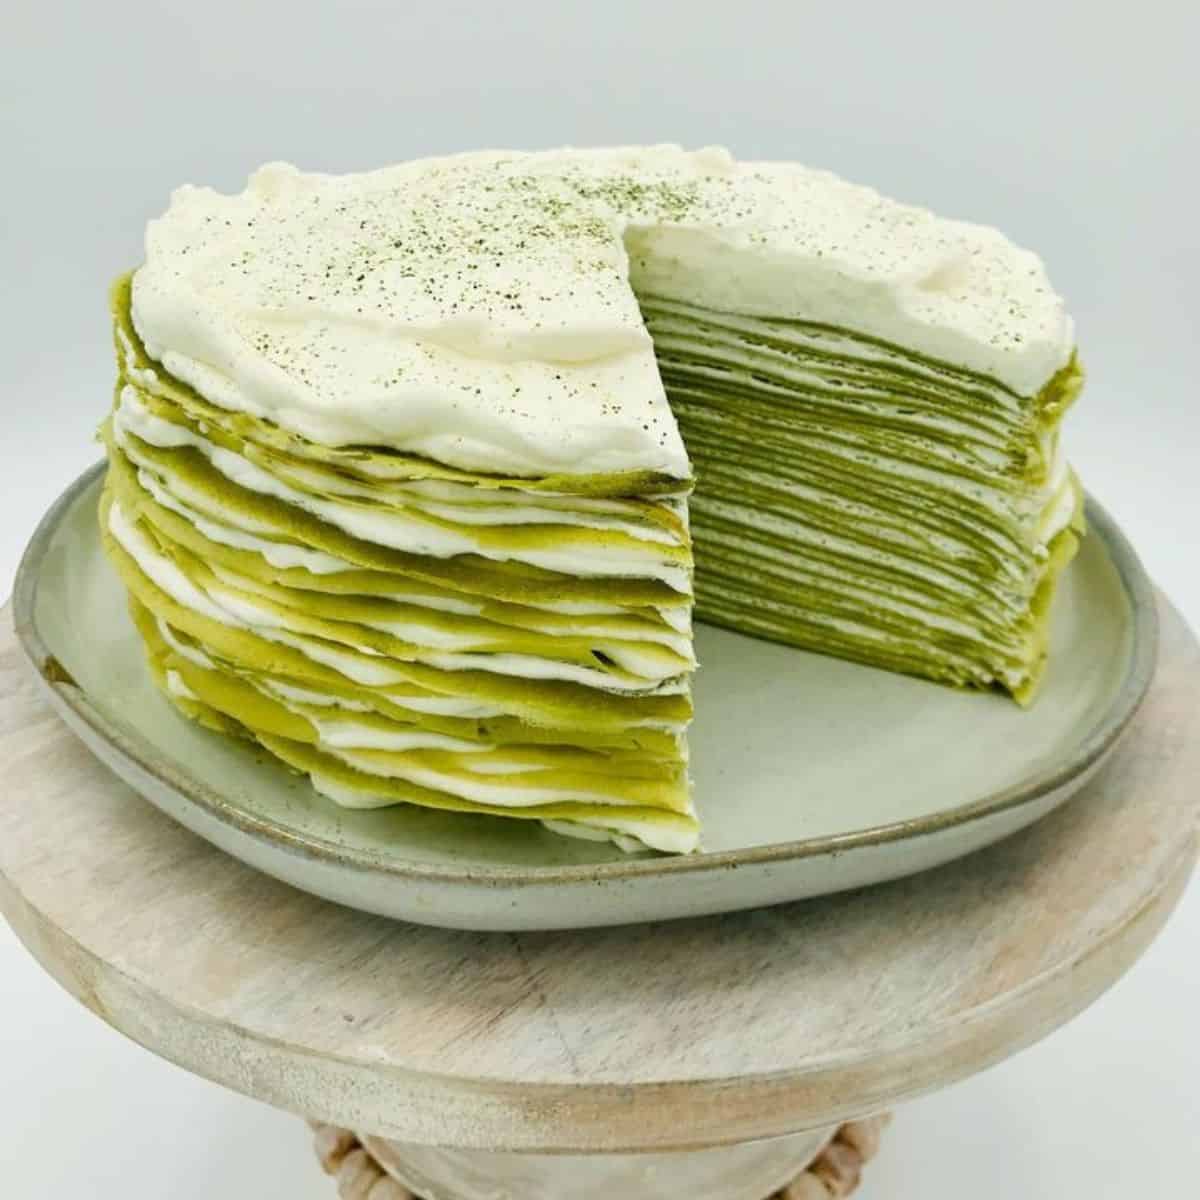 A display of delicious green Japanese dessert with thick, white cream in between each layer